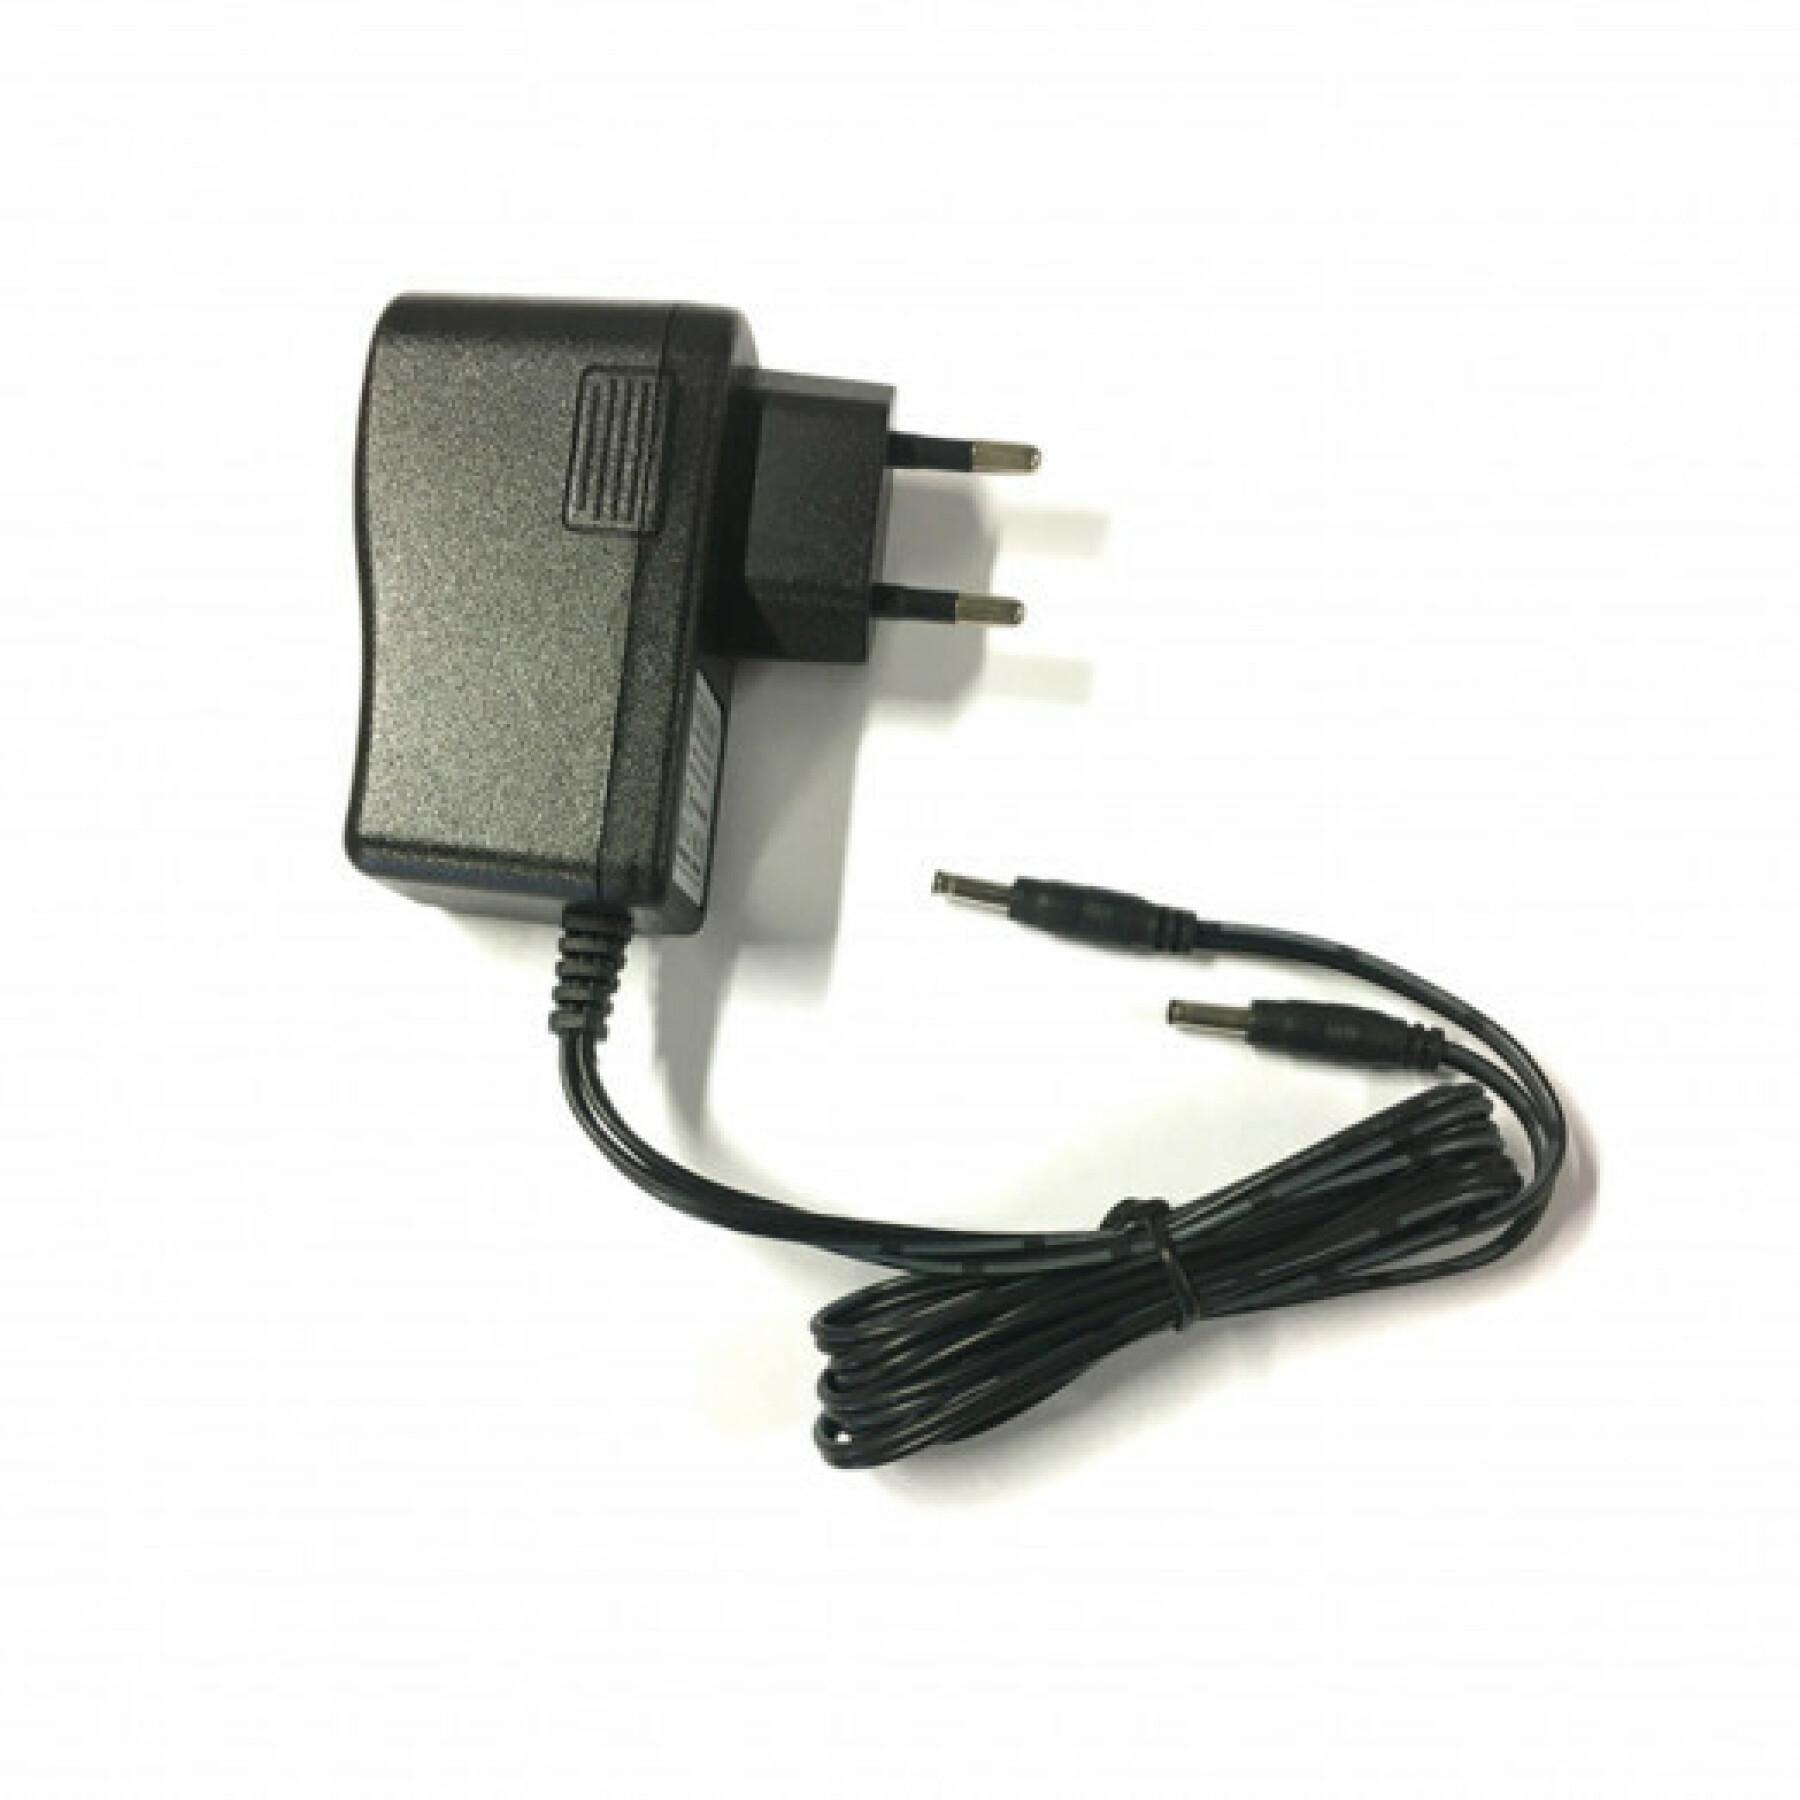 Battery charger Difi oplader polaris ax